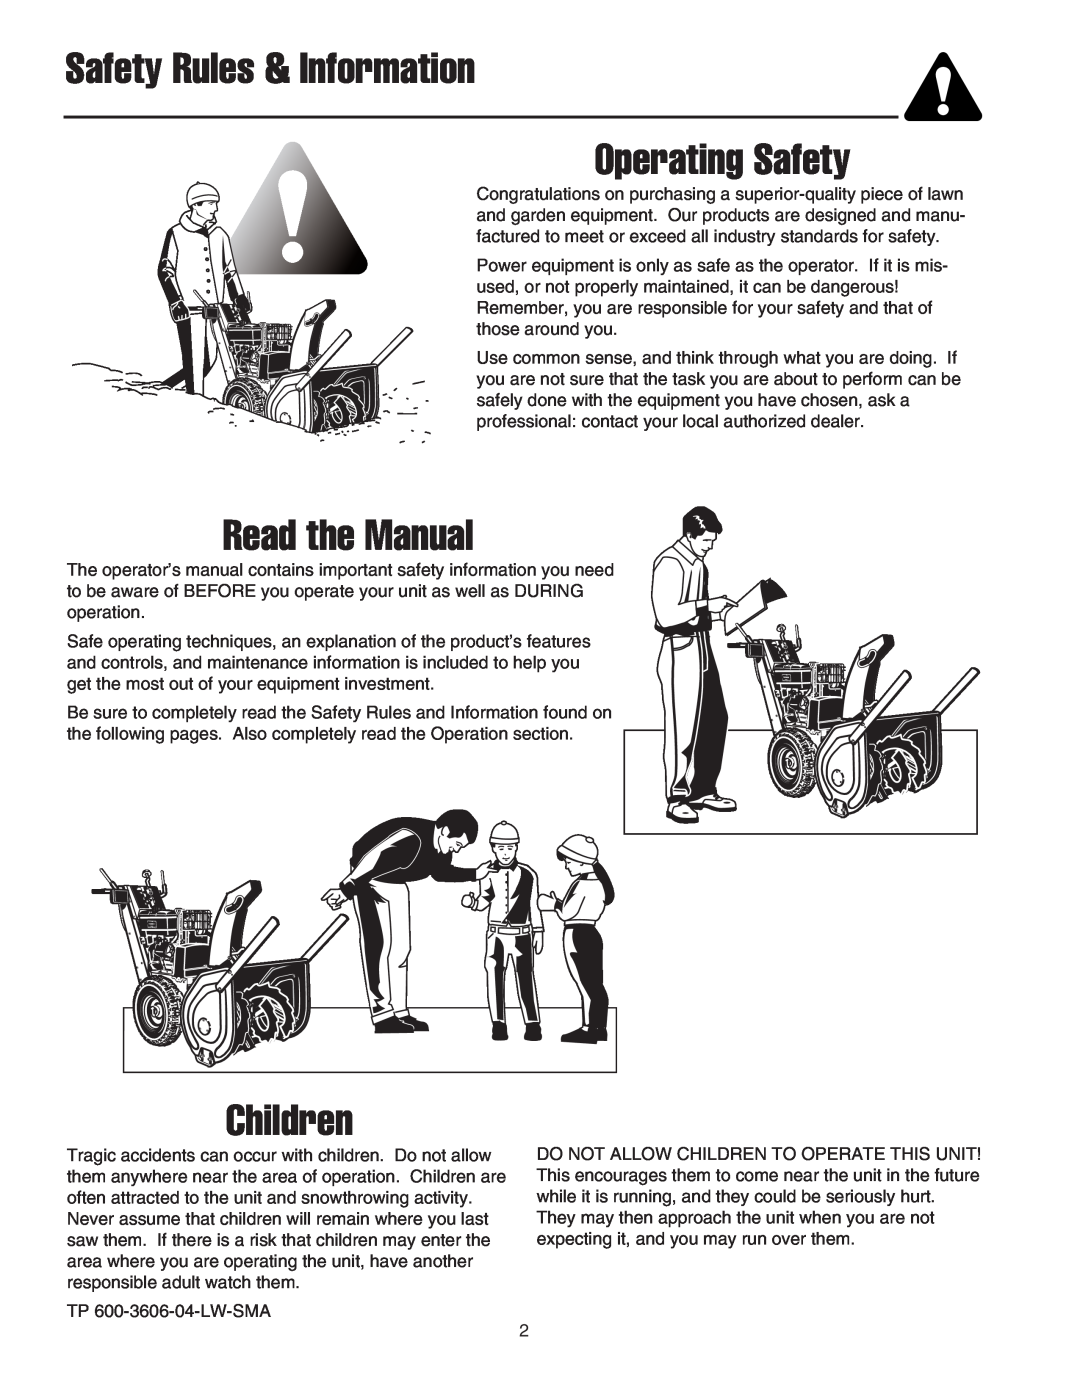 Snapper 522E manual Safety Rules & Information Operating Safety, Read the Manual, Children 